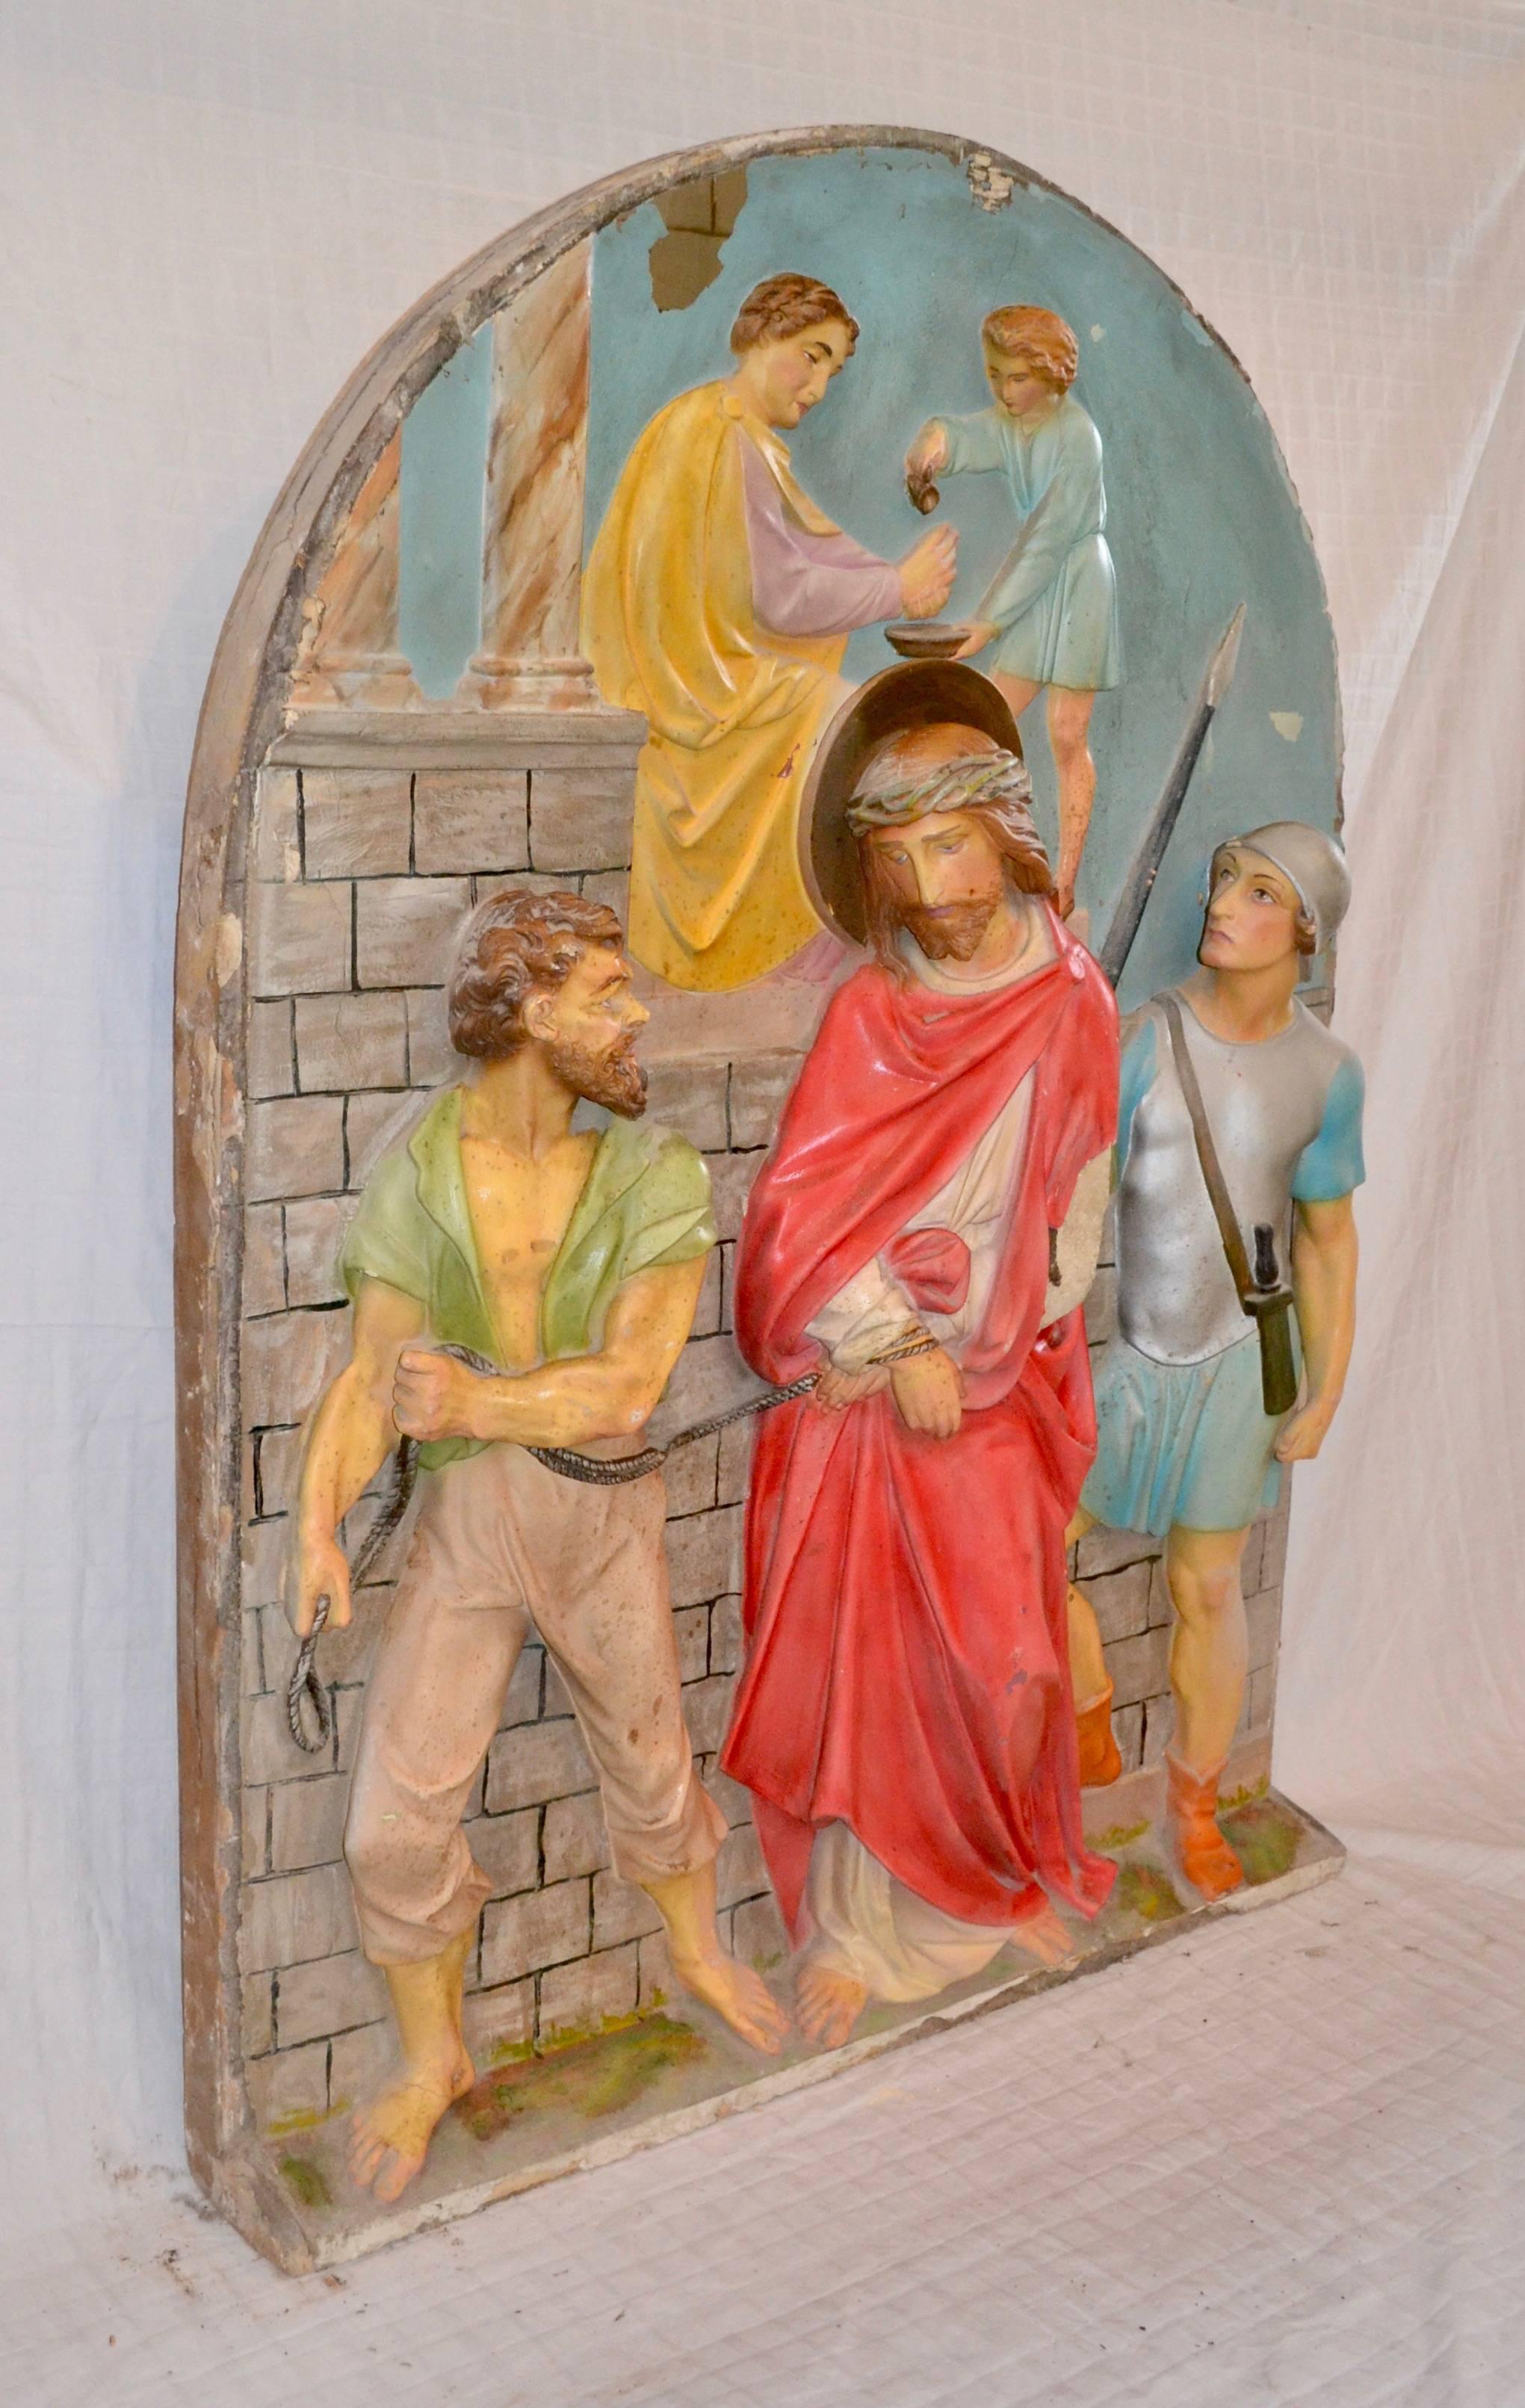 These unusual Stations of the Cross are possible De Prado Studios. The panels are in good condition with some minor losses. The vibrant colors are consistent with and characteristic of a midcentury repaint. Panel shown is one of eight remaining with